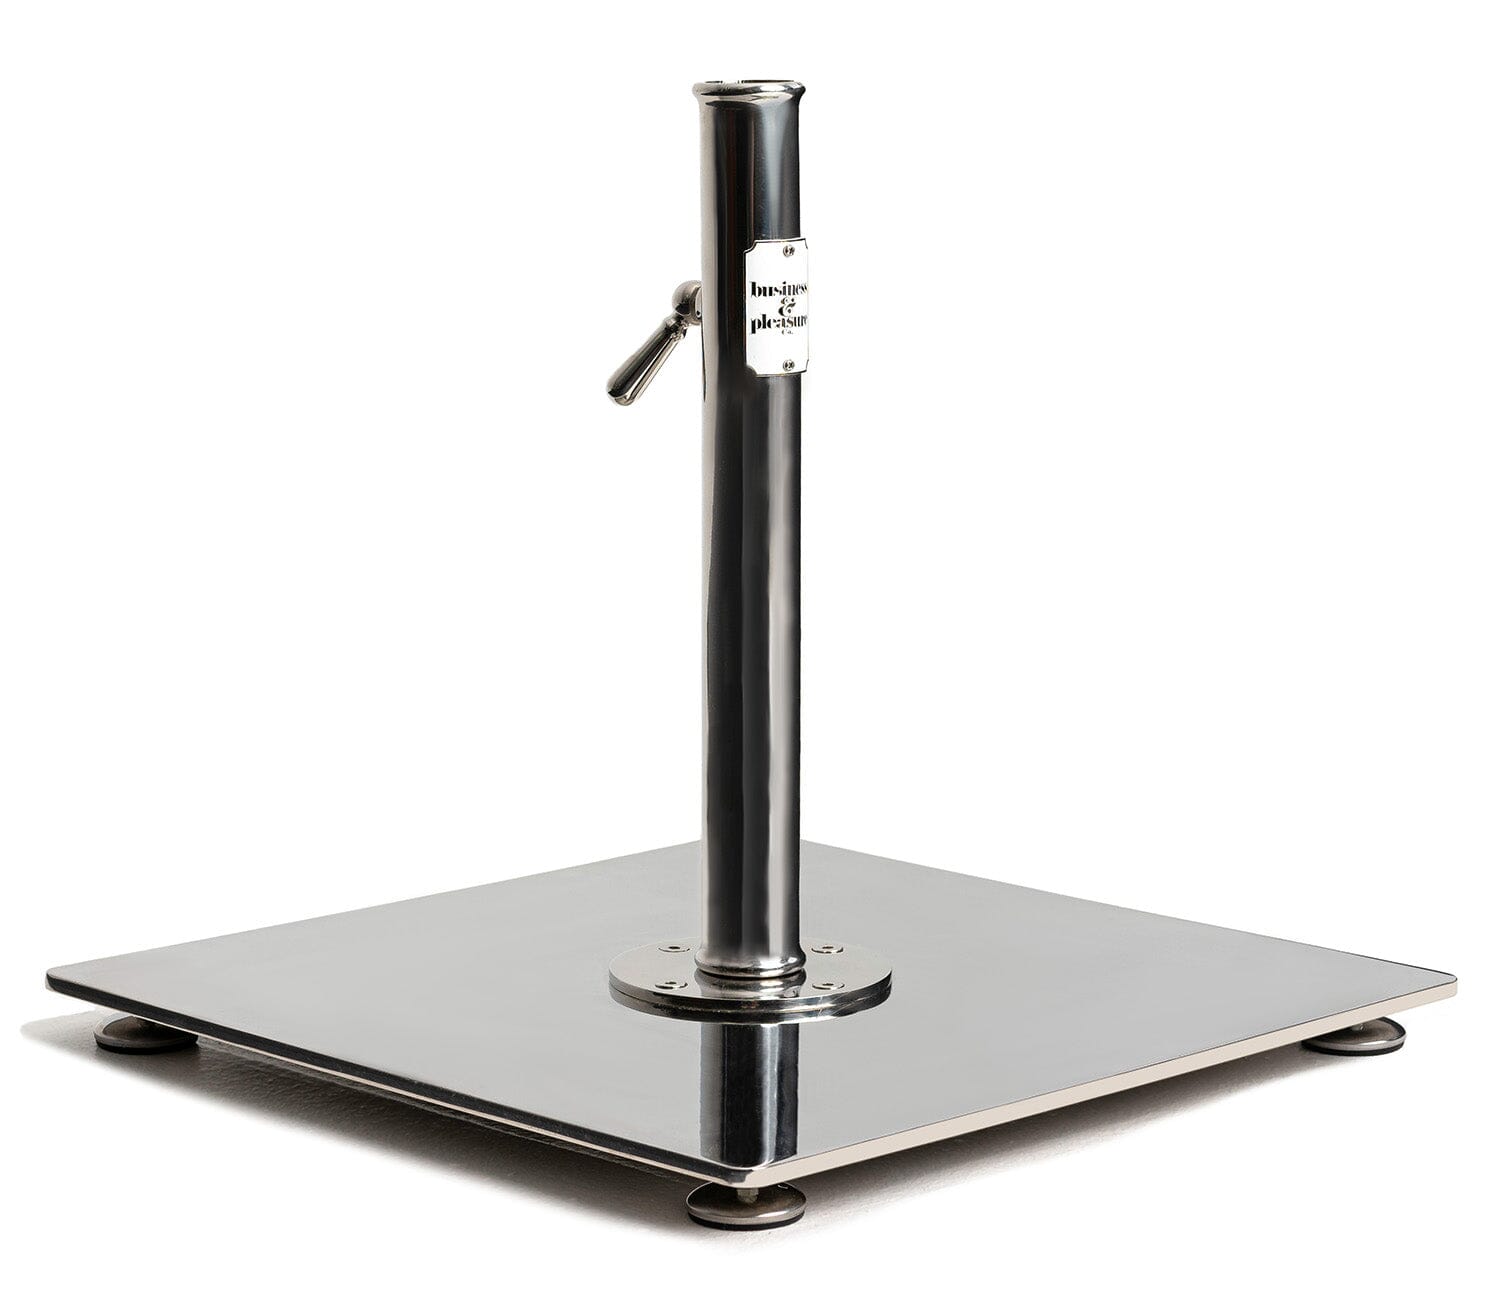 The Stainless Steel Base - 55 lbs - Stainless Steel